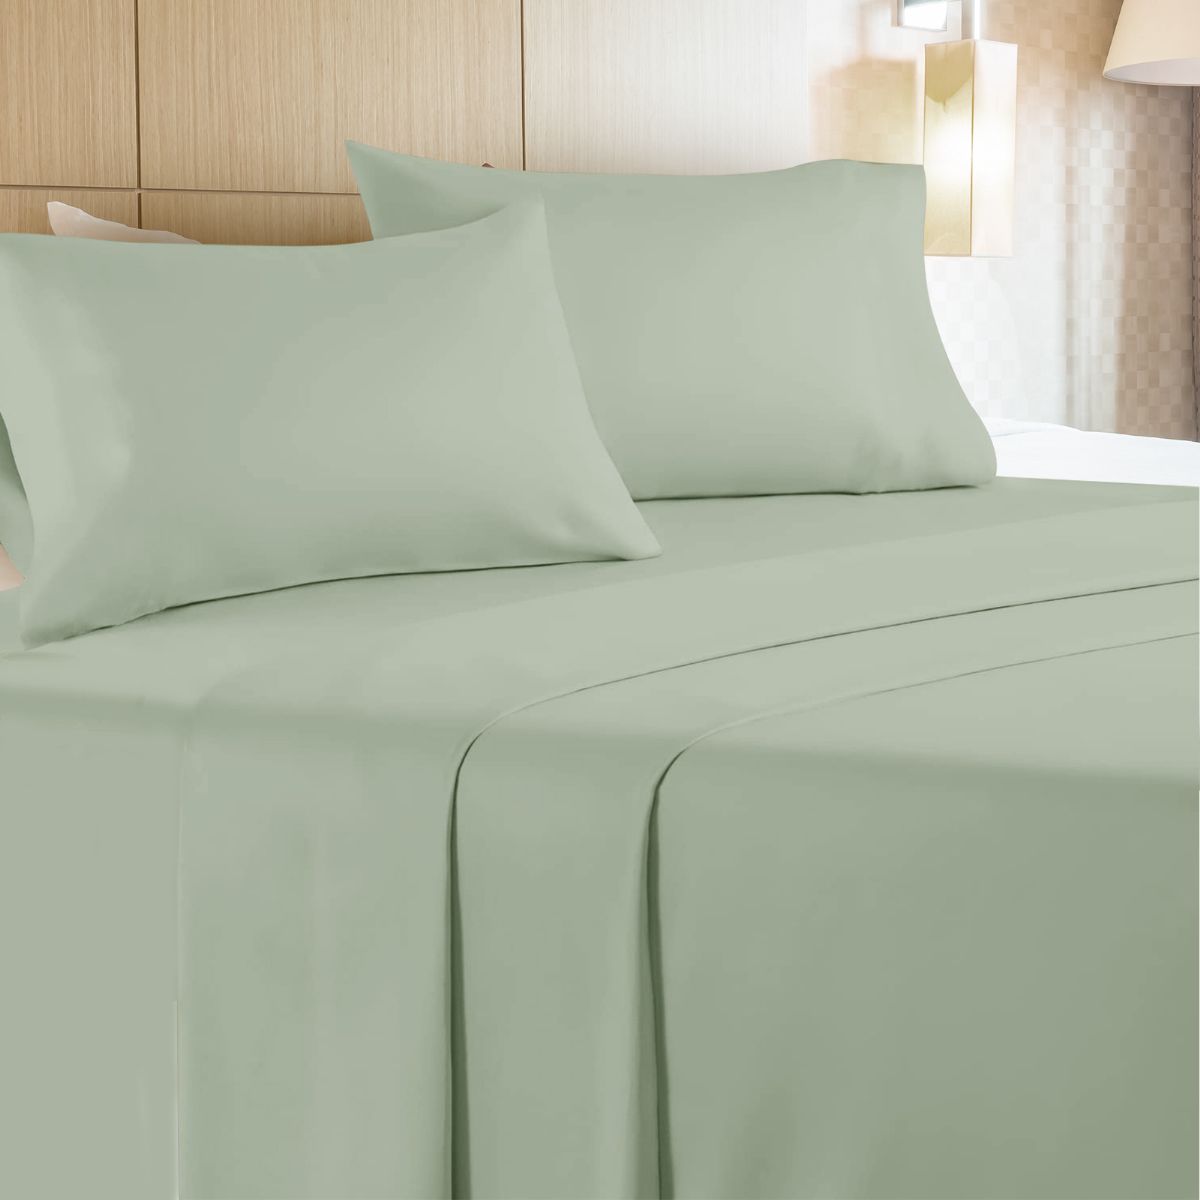 6 Sets of 4 Piece Microfiber Bed Sheet Set Twin Size In Sage